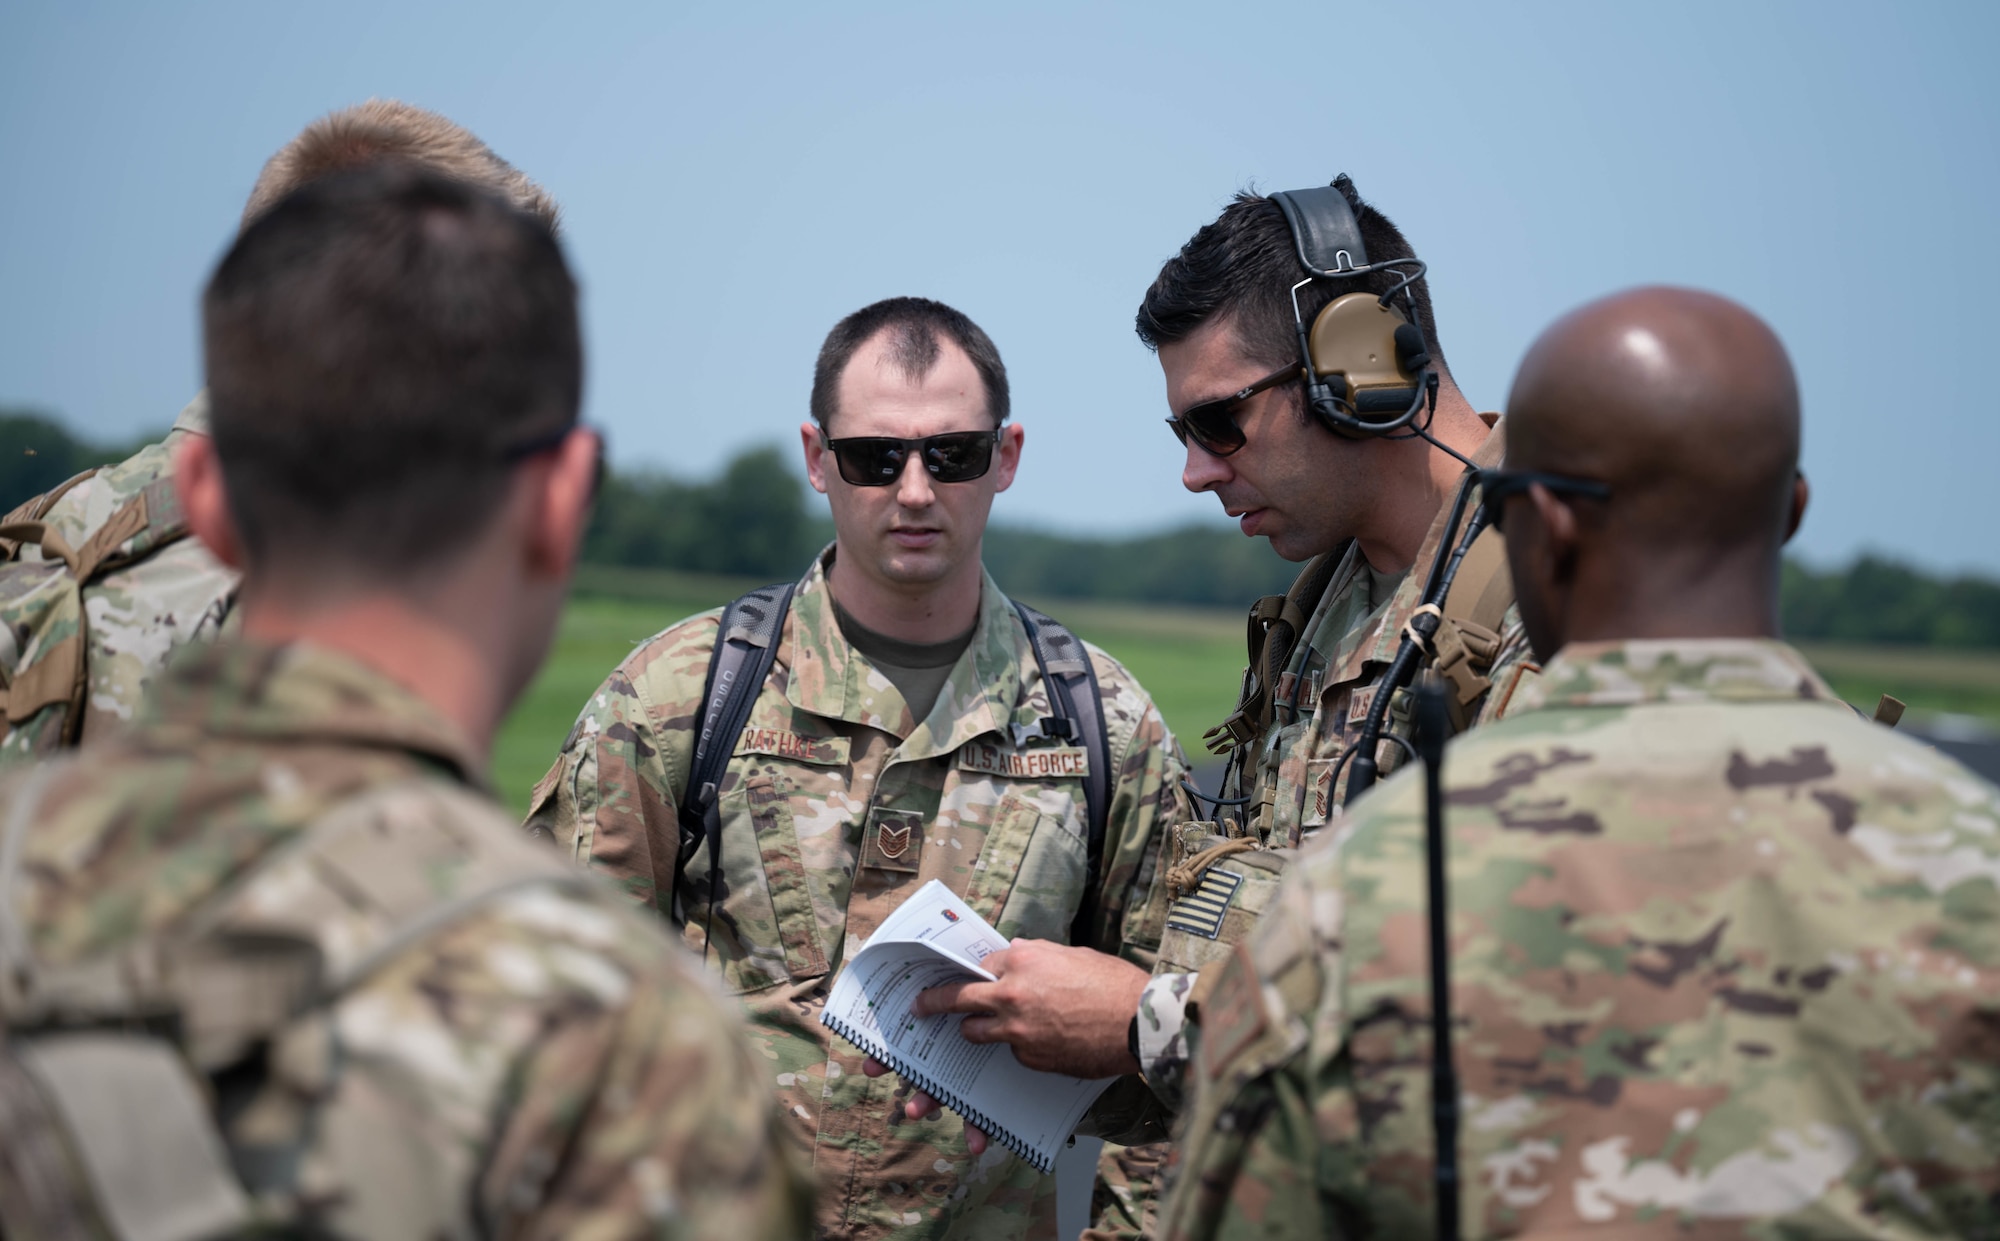 U.S. Air Force Tech. Sgt. Ryan Rathke, Landing Zone Operations Course student, measures the length of a simulated landing zone at Schafer Field in St. Jacob, Illinois, July 30, 2021. As part of the Landing Zone Operations Course students simulate surveying a landing zone.